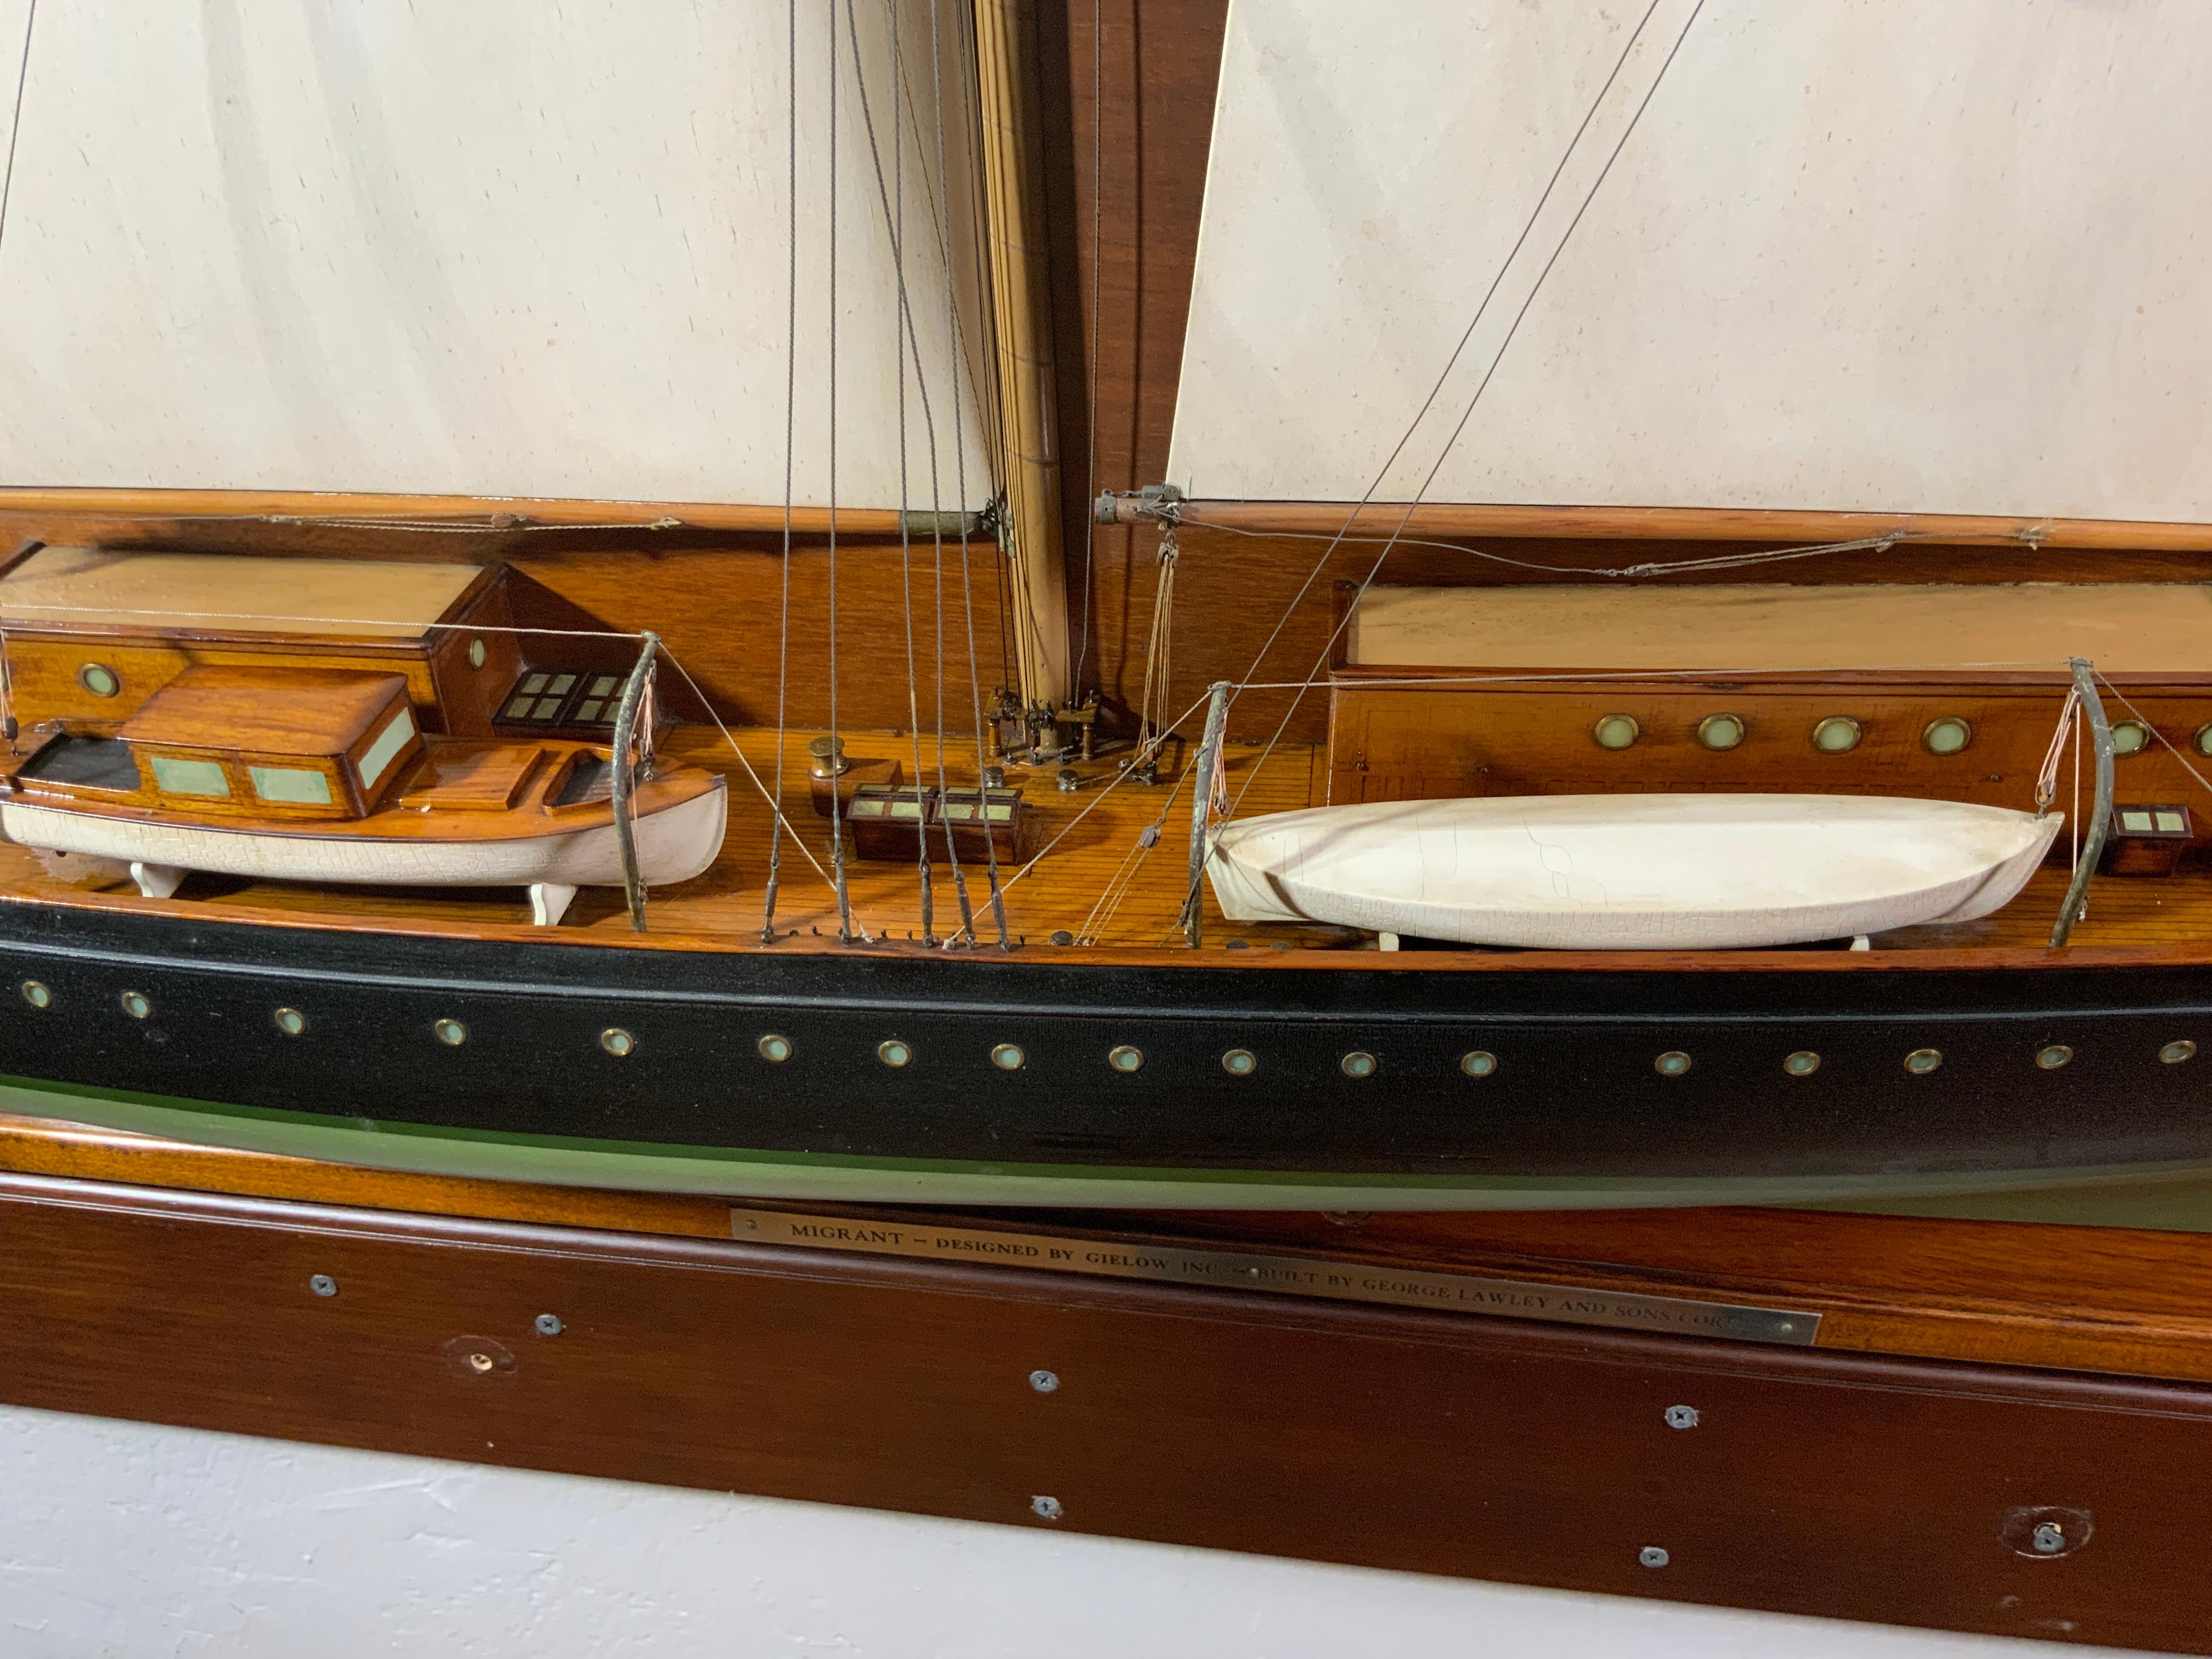 Early 20th Century Builder’s Half Model of the Schooner Yacht Migrant For Sale